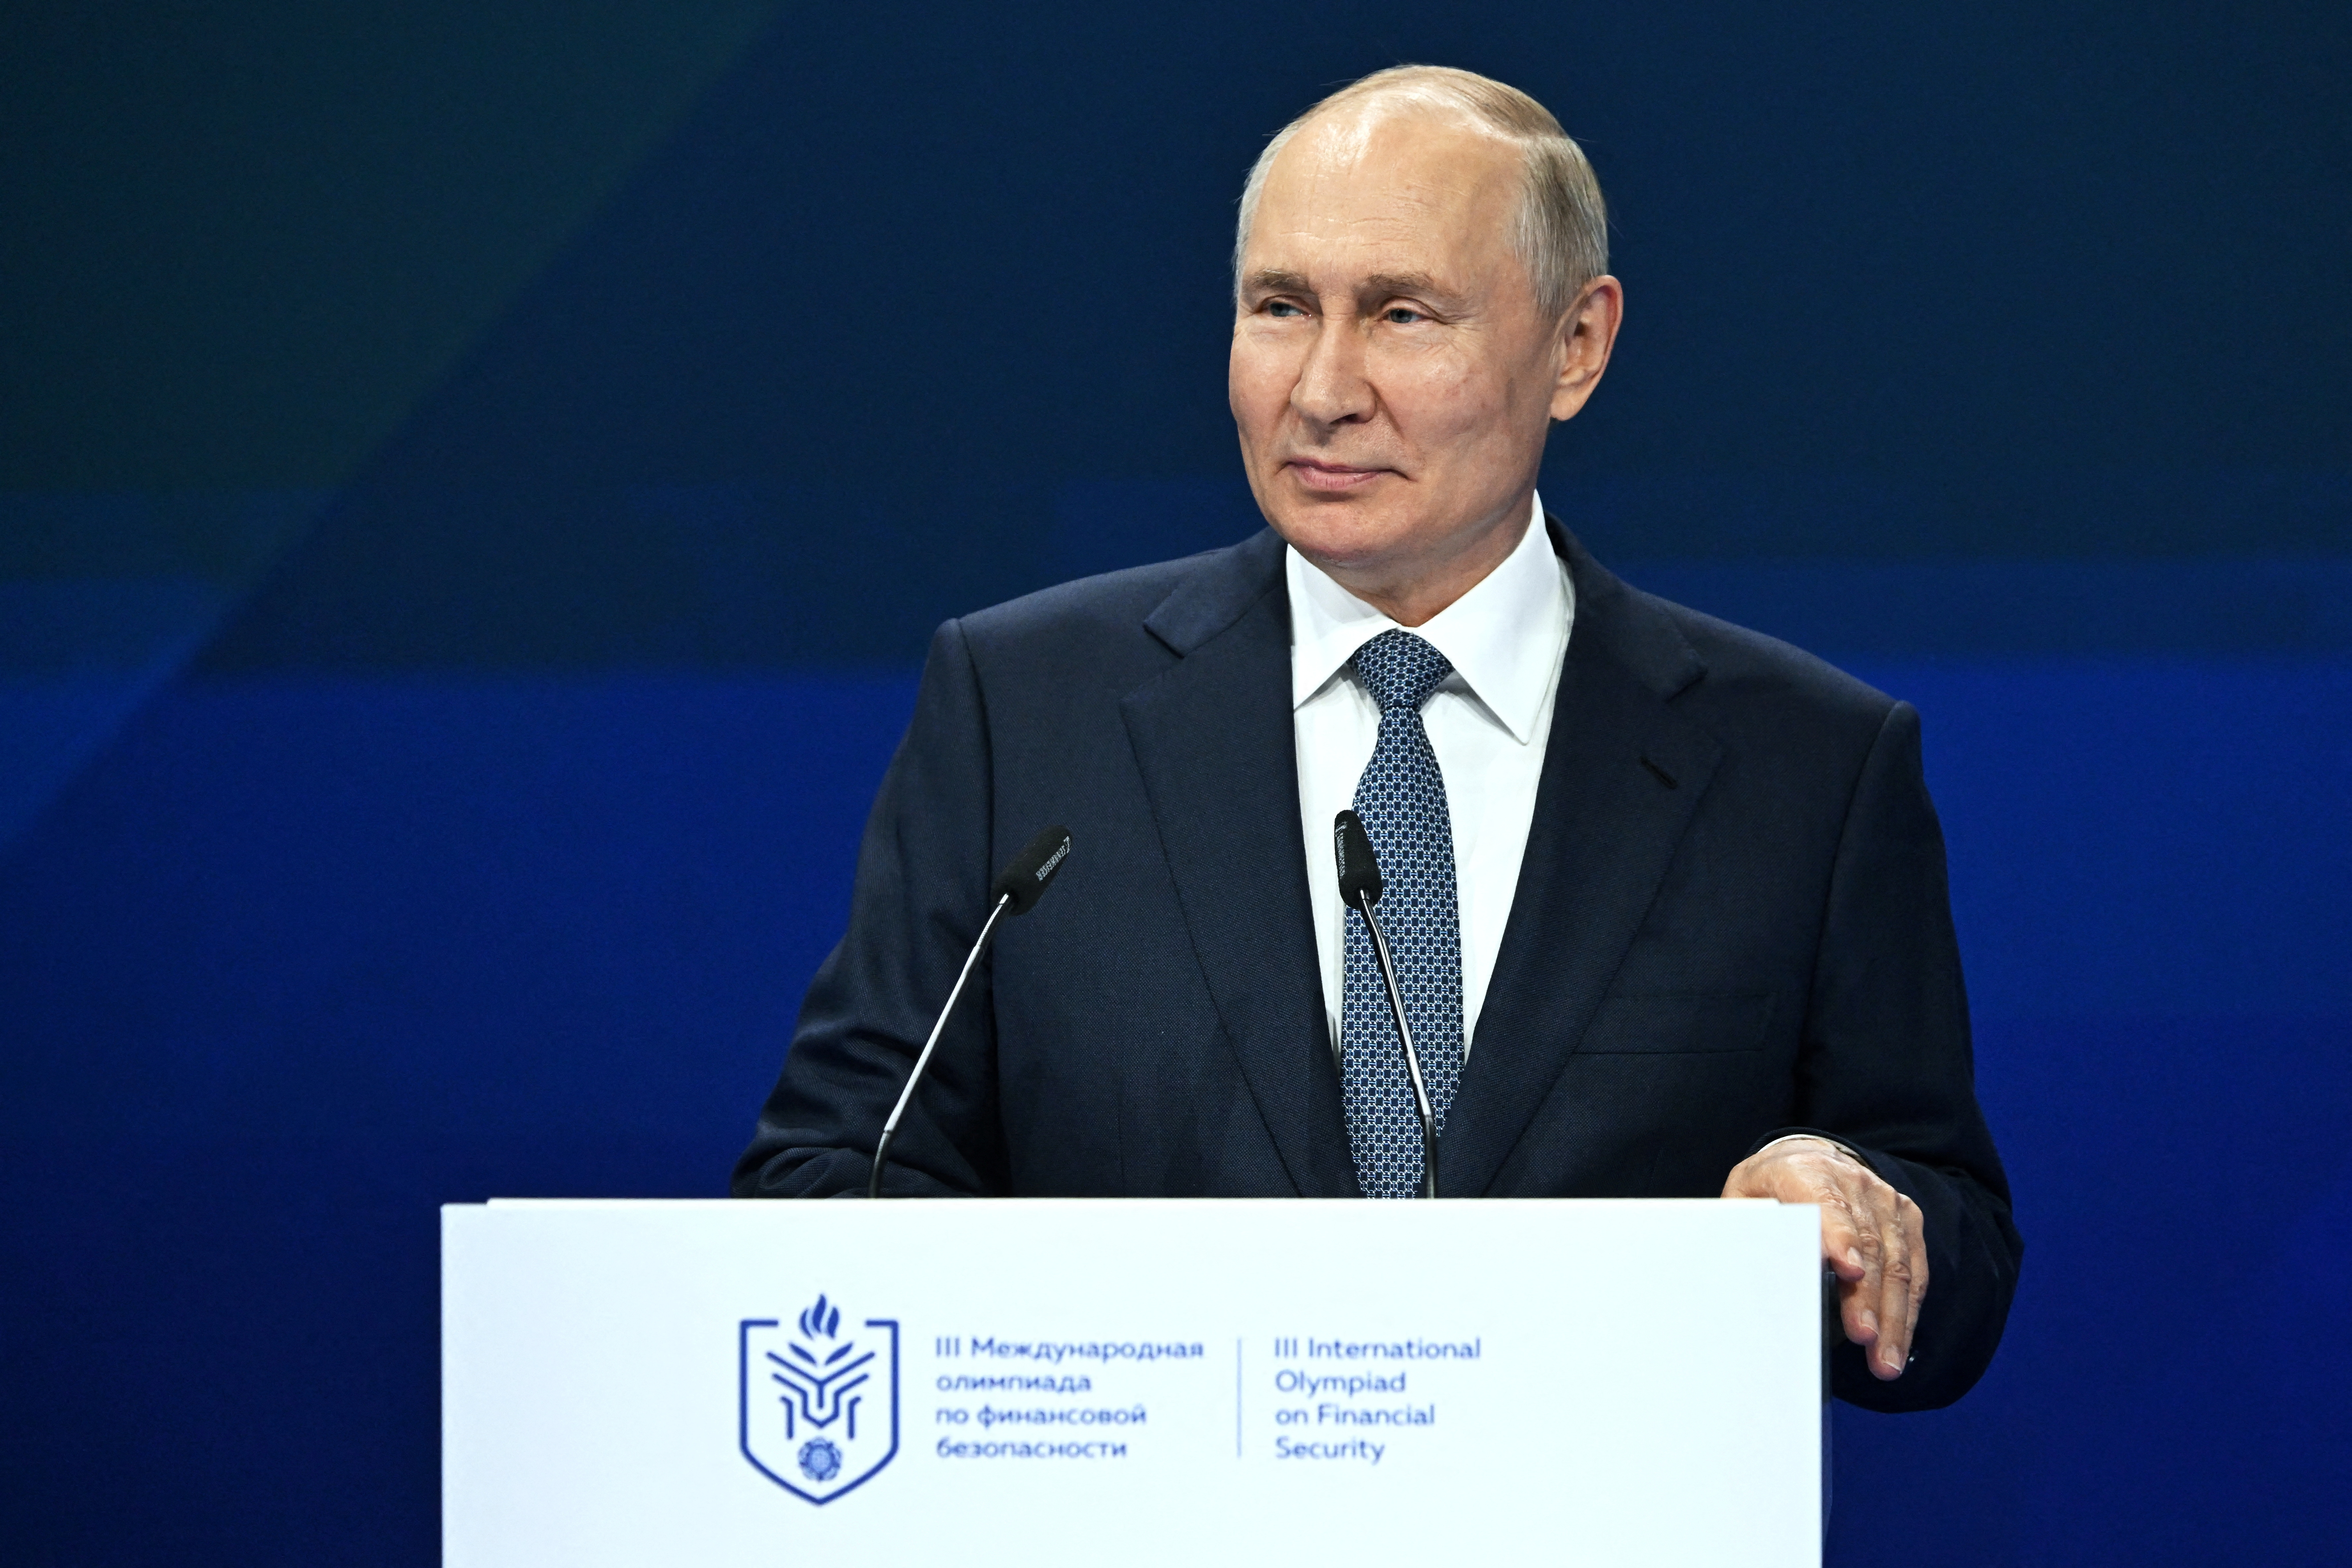 Russian President Vladimir Putin attends a plenary session as part of the 3rd International Olympiad on Financial Security in the Sirius Park of Science and Art in Krasnodar region